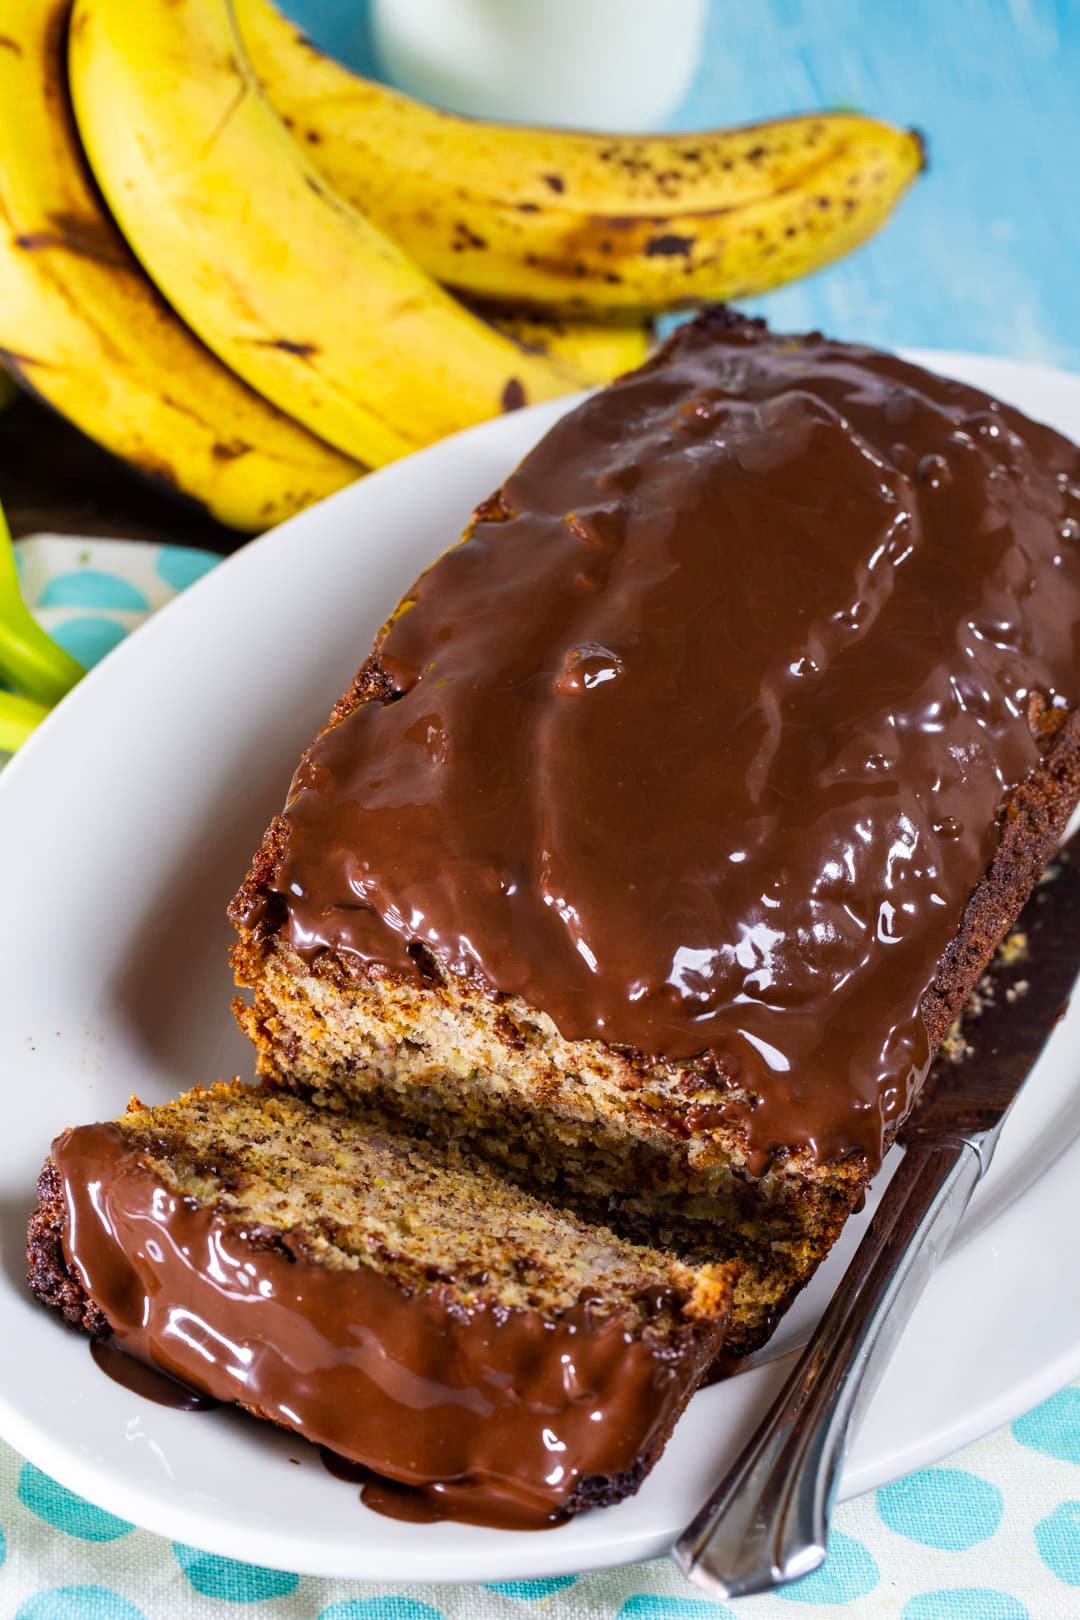 Banana Bread with Chocolate Glaze on serving plate.